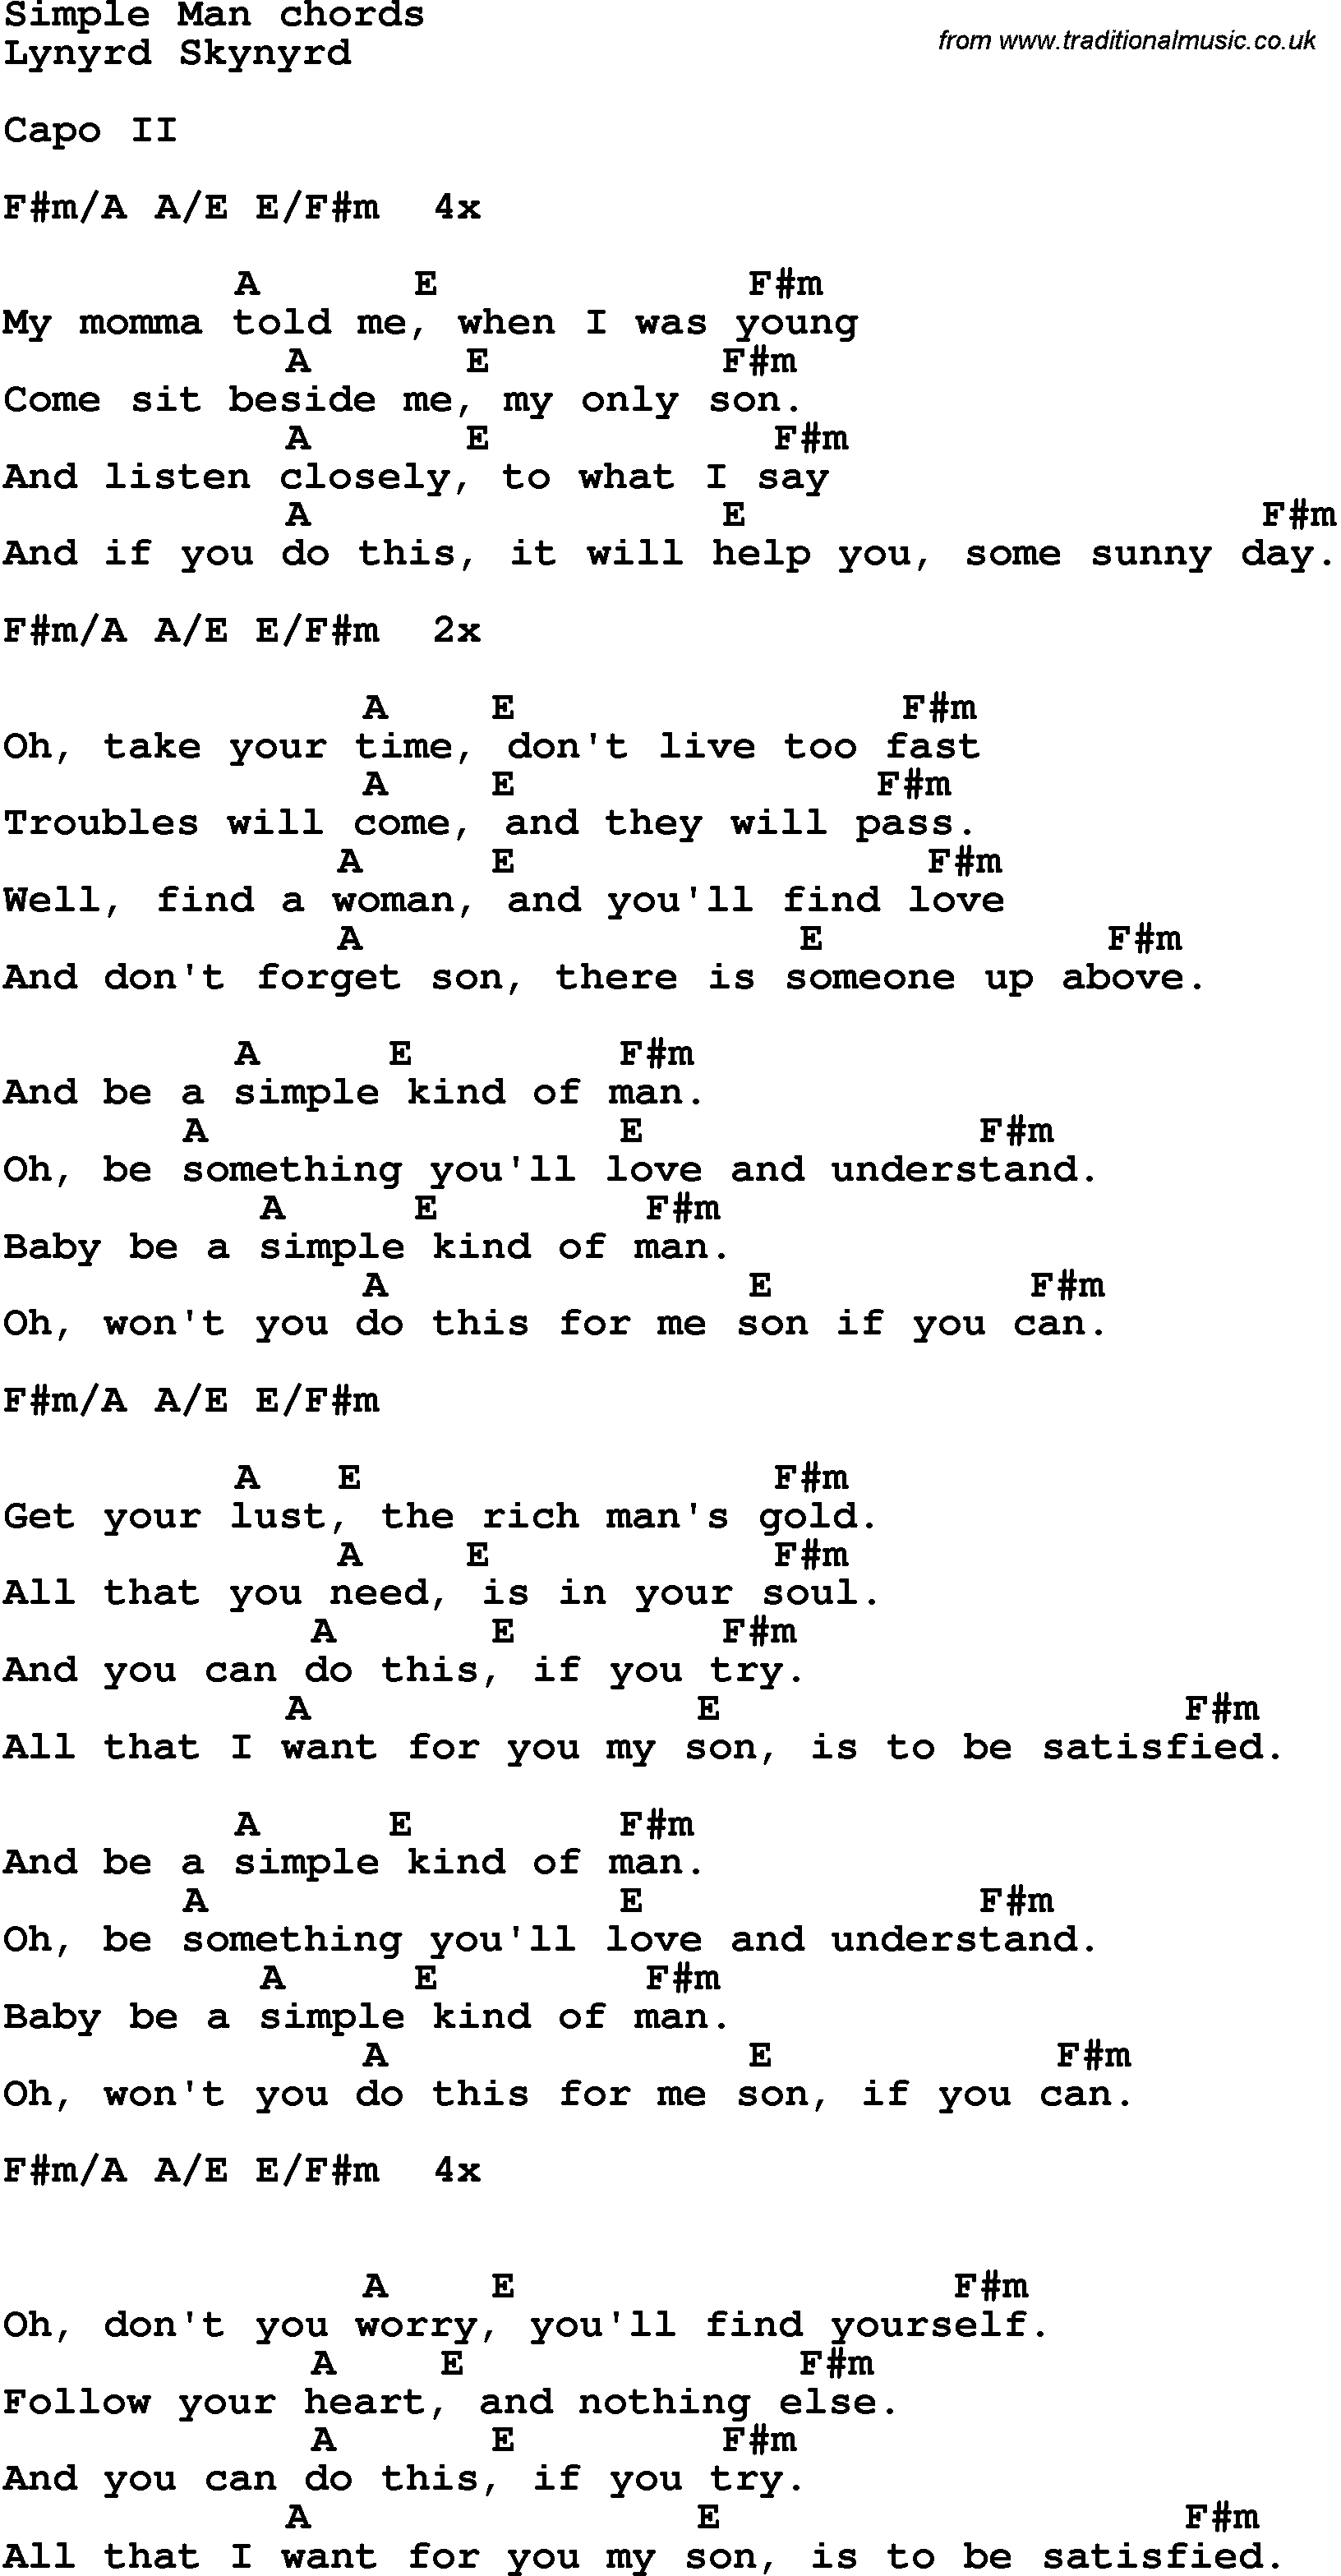 Simple Man Chords Song Lyrics With Guitar Chords For Simple Man